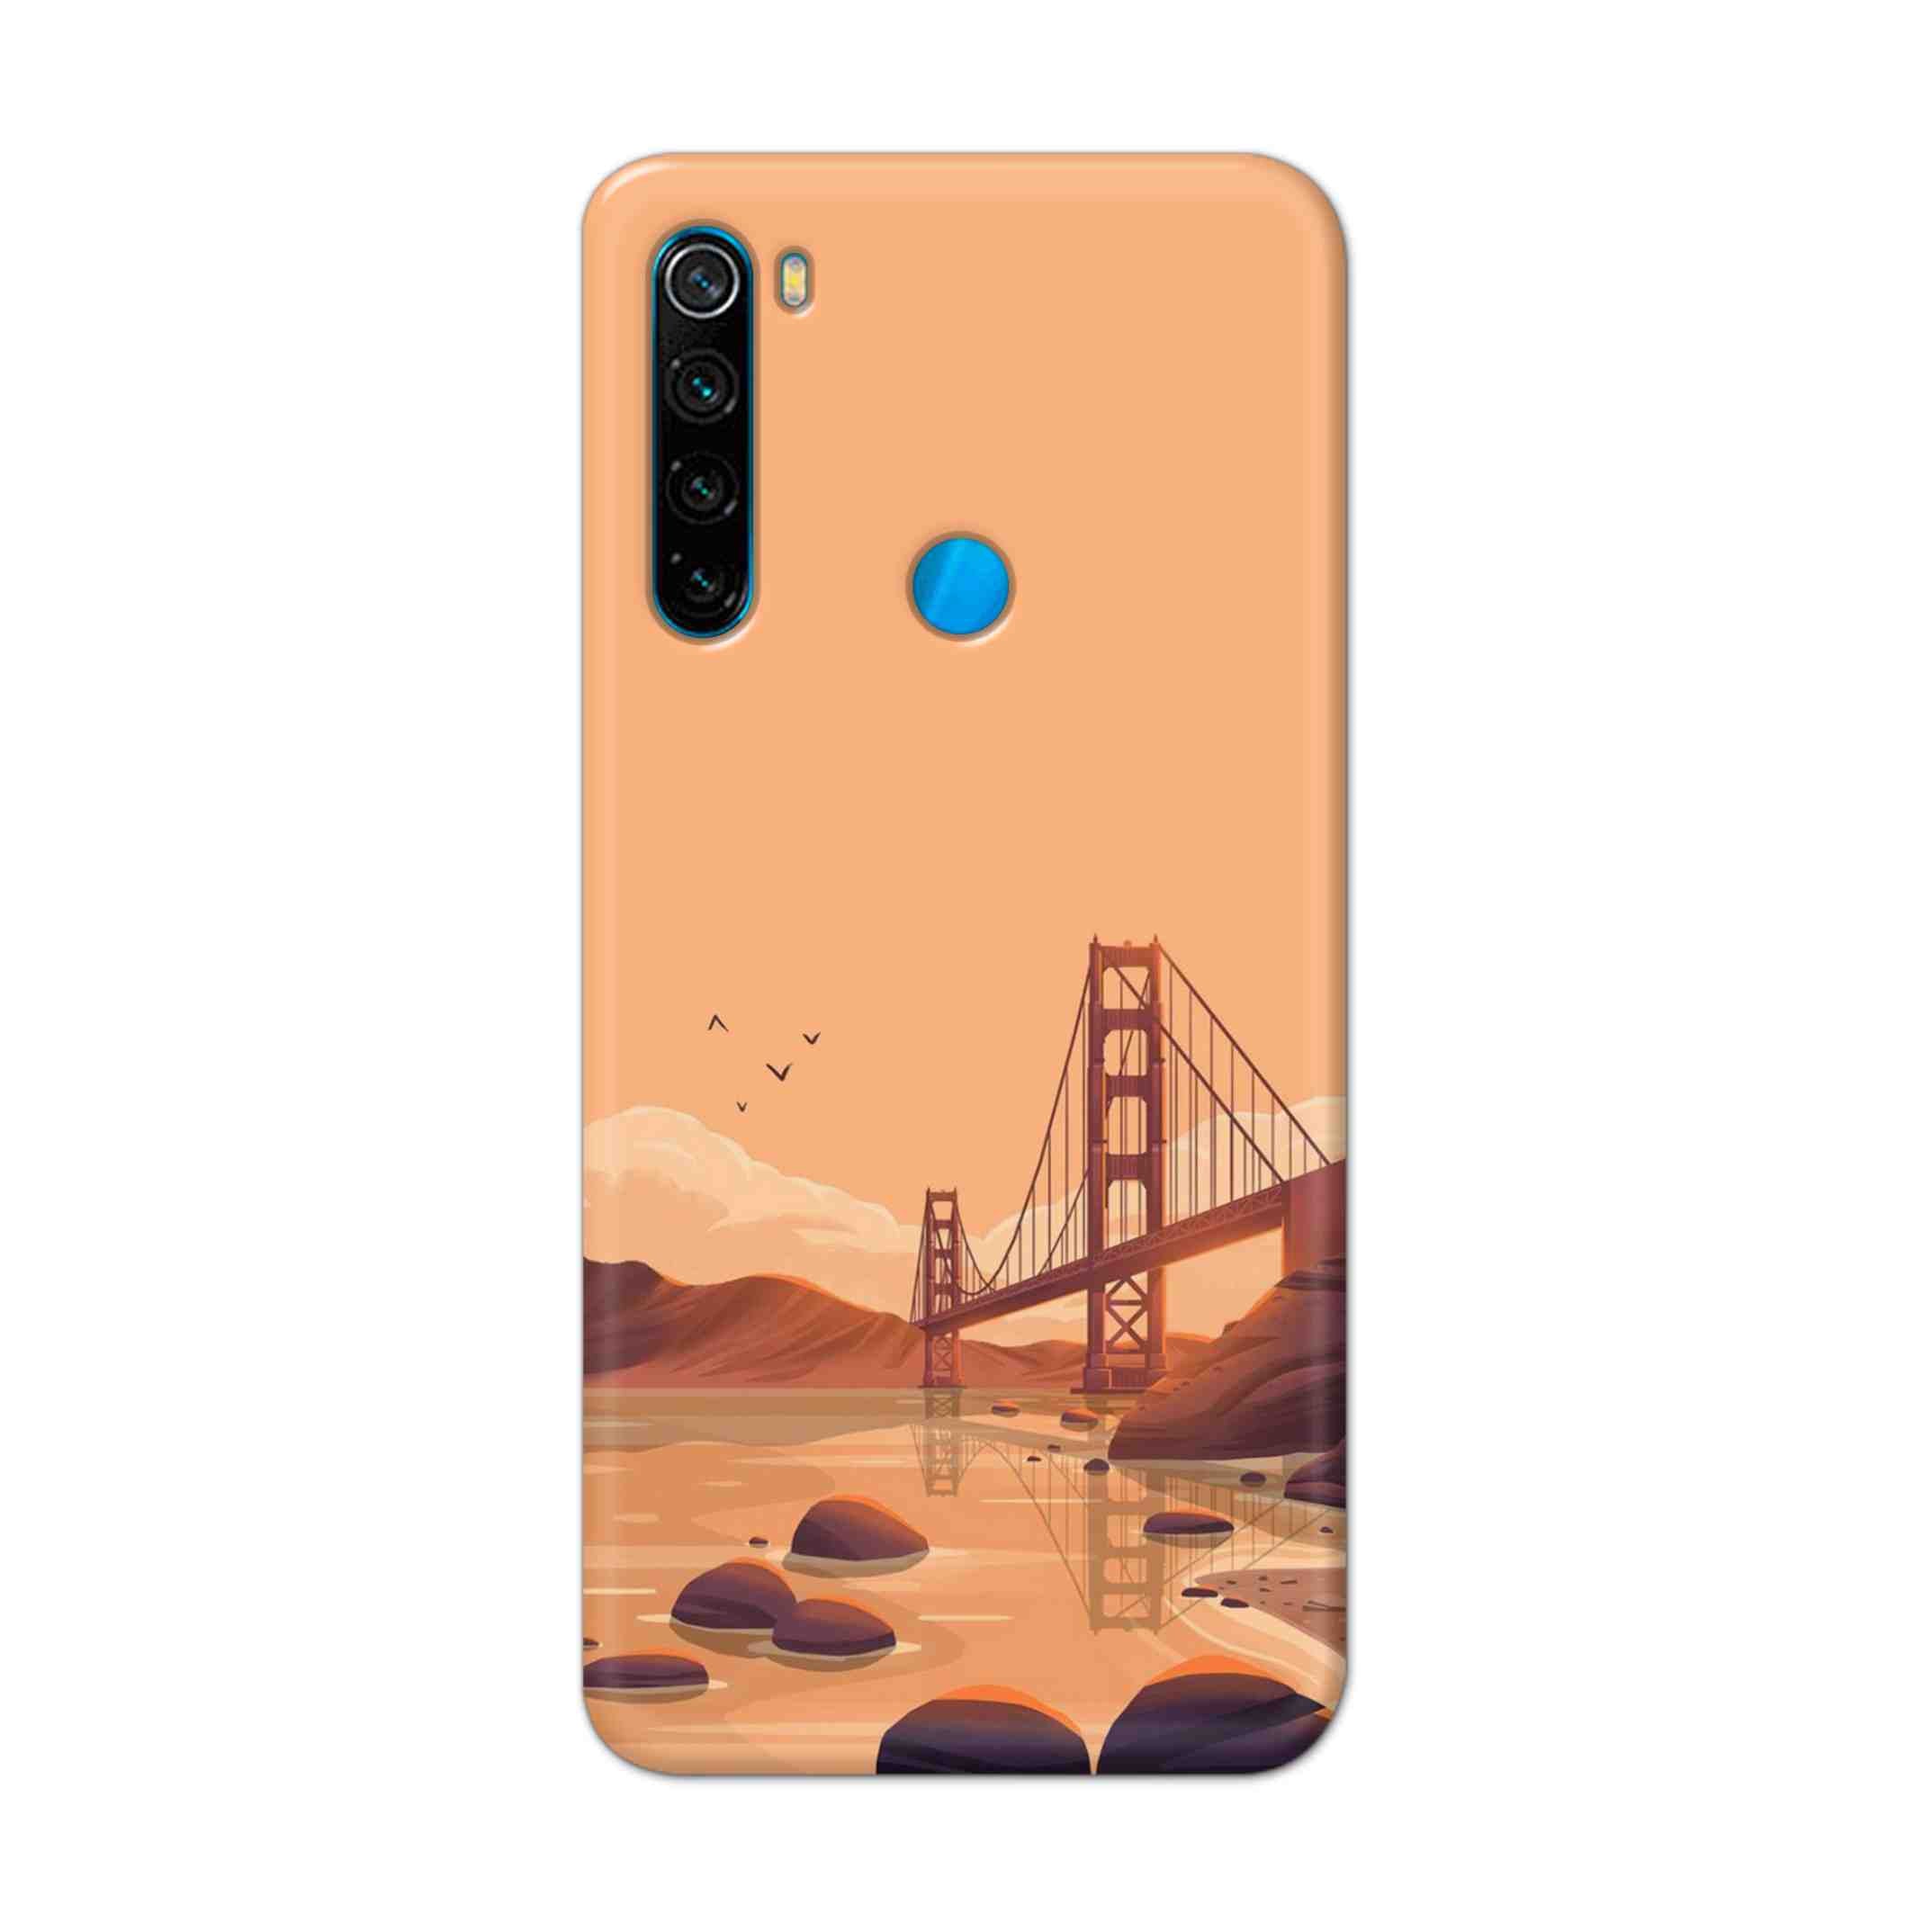 Buy San Francisco Hard Back Mobile Phone Case Cover For Xiaomi Redmi Note 8 Online